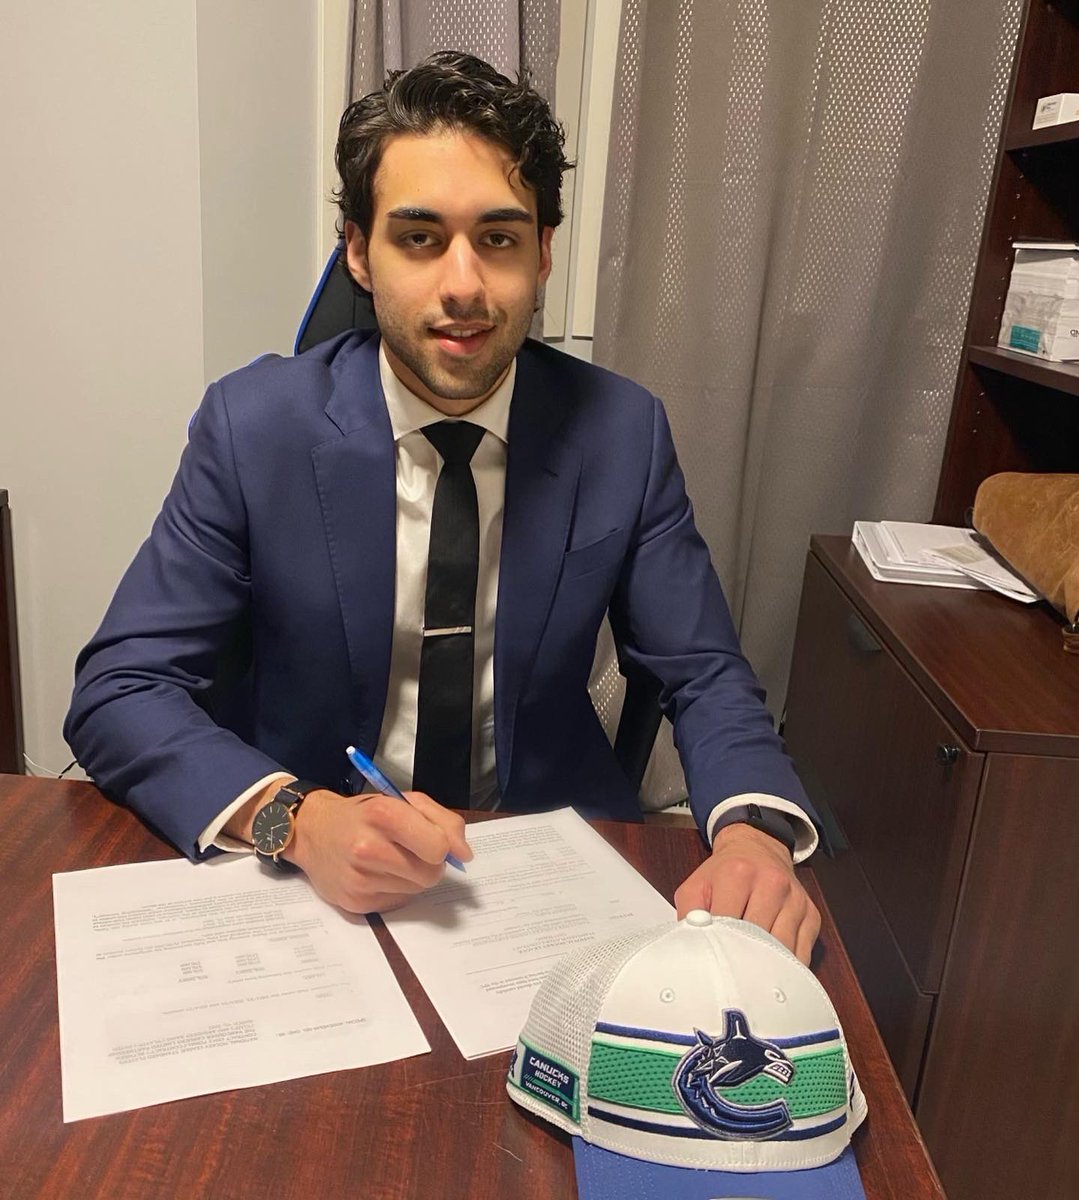 Truly honoured & grateful to sign a contract with my childhood team the @Canucks It’s a dream come true. I would like to thank the @Rebelshockey for helping me reach my goal, thank you to my family, teammates, billets & @LiveSportsEnter for everything they’ve done.